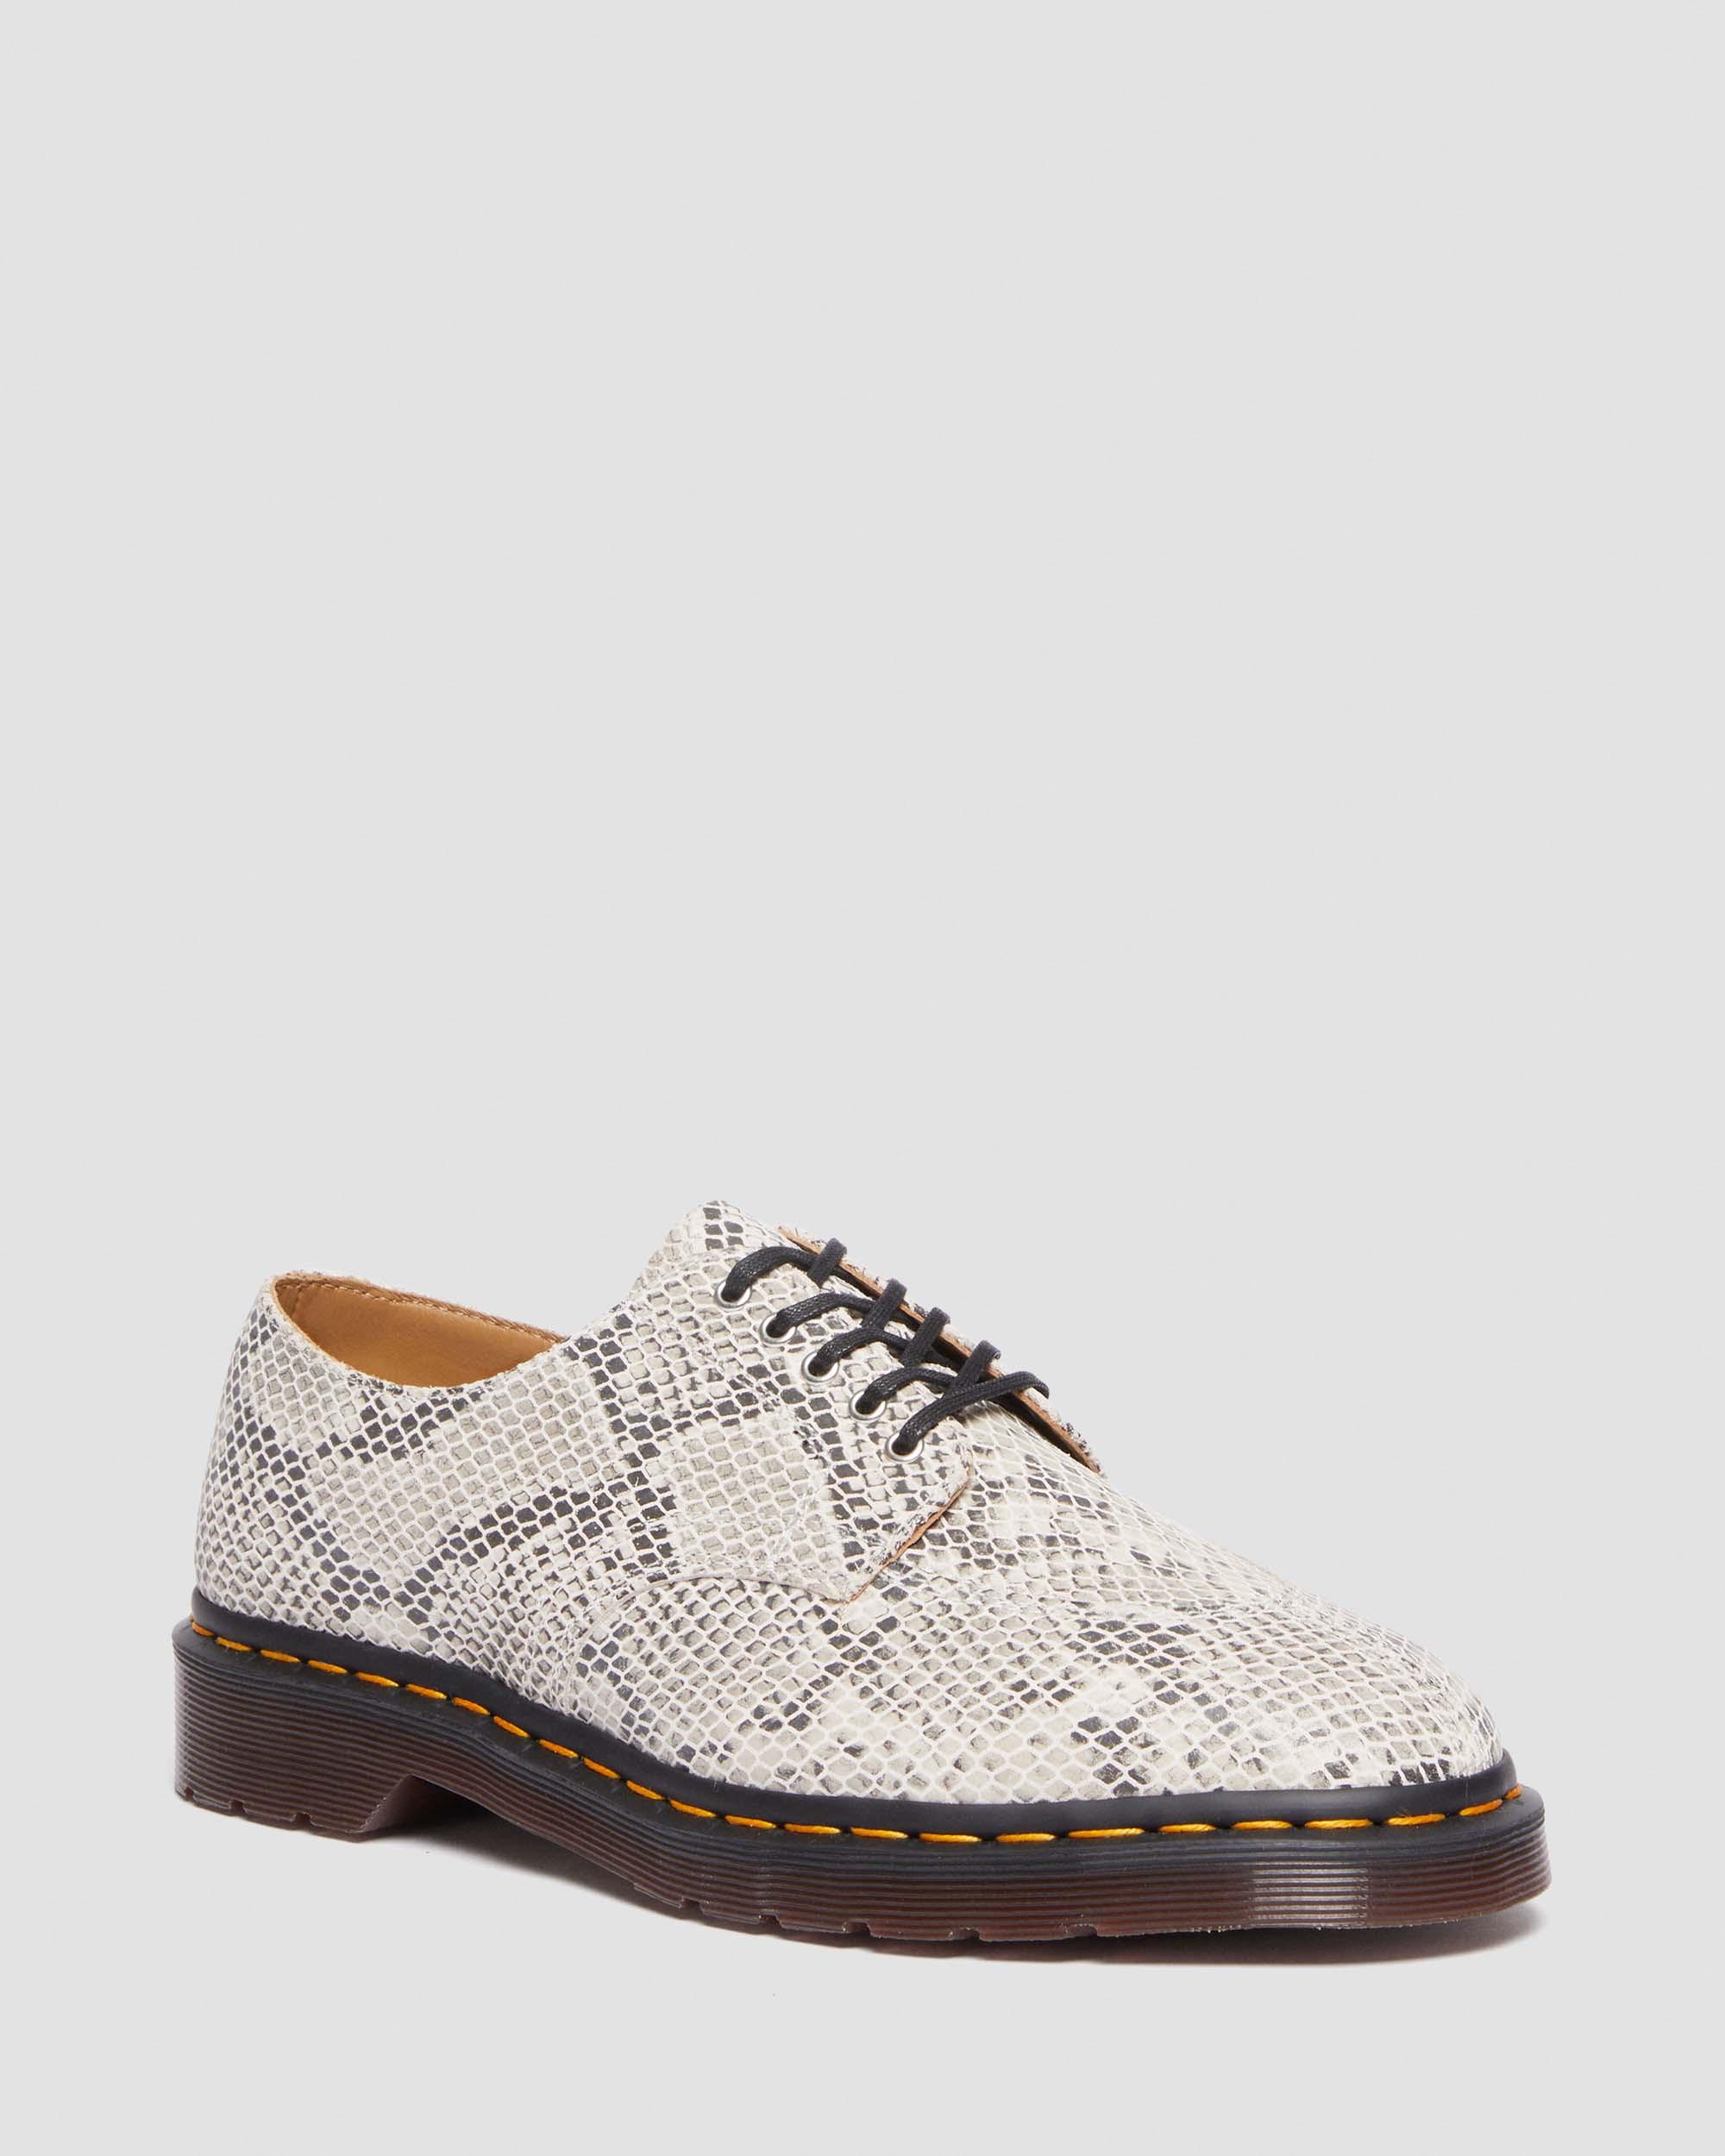 2046 Snake Print Suede Oxford Shoes in Sand | Dr. Martens